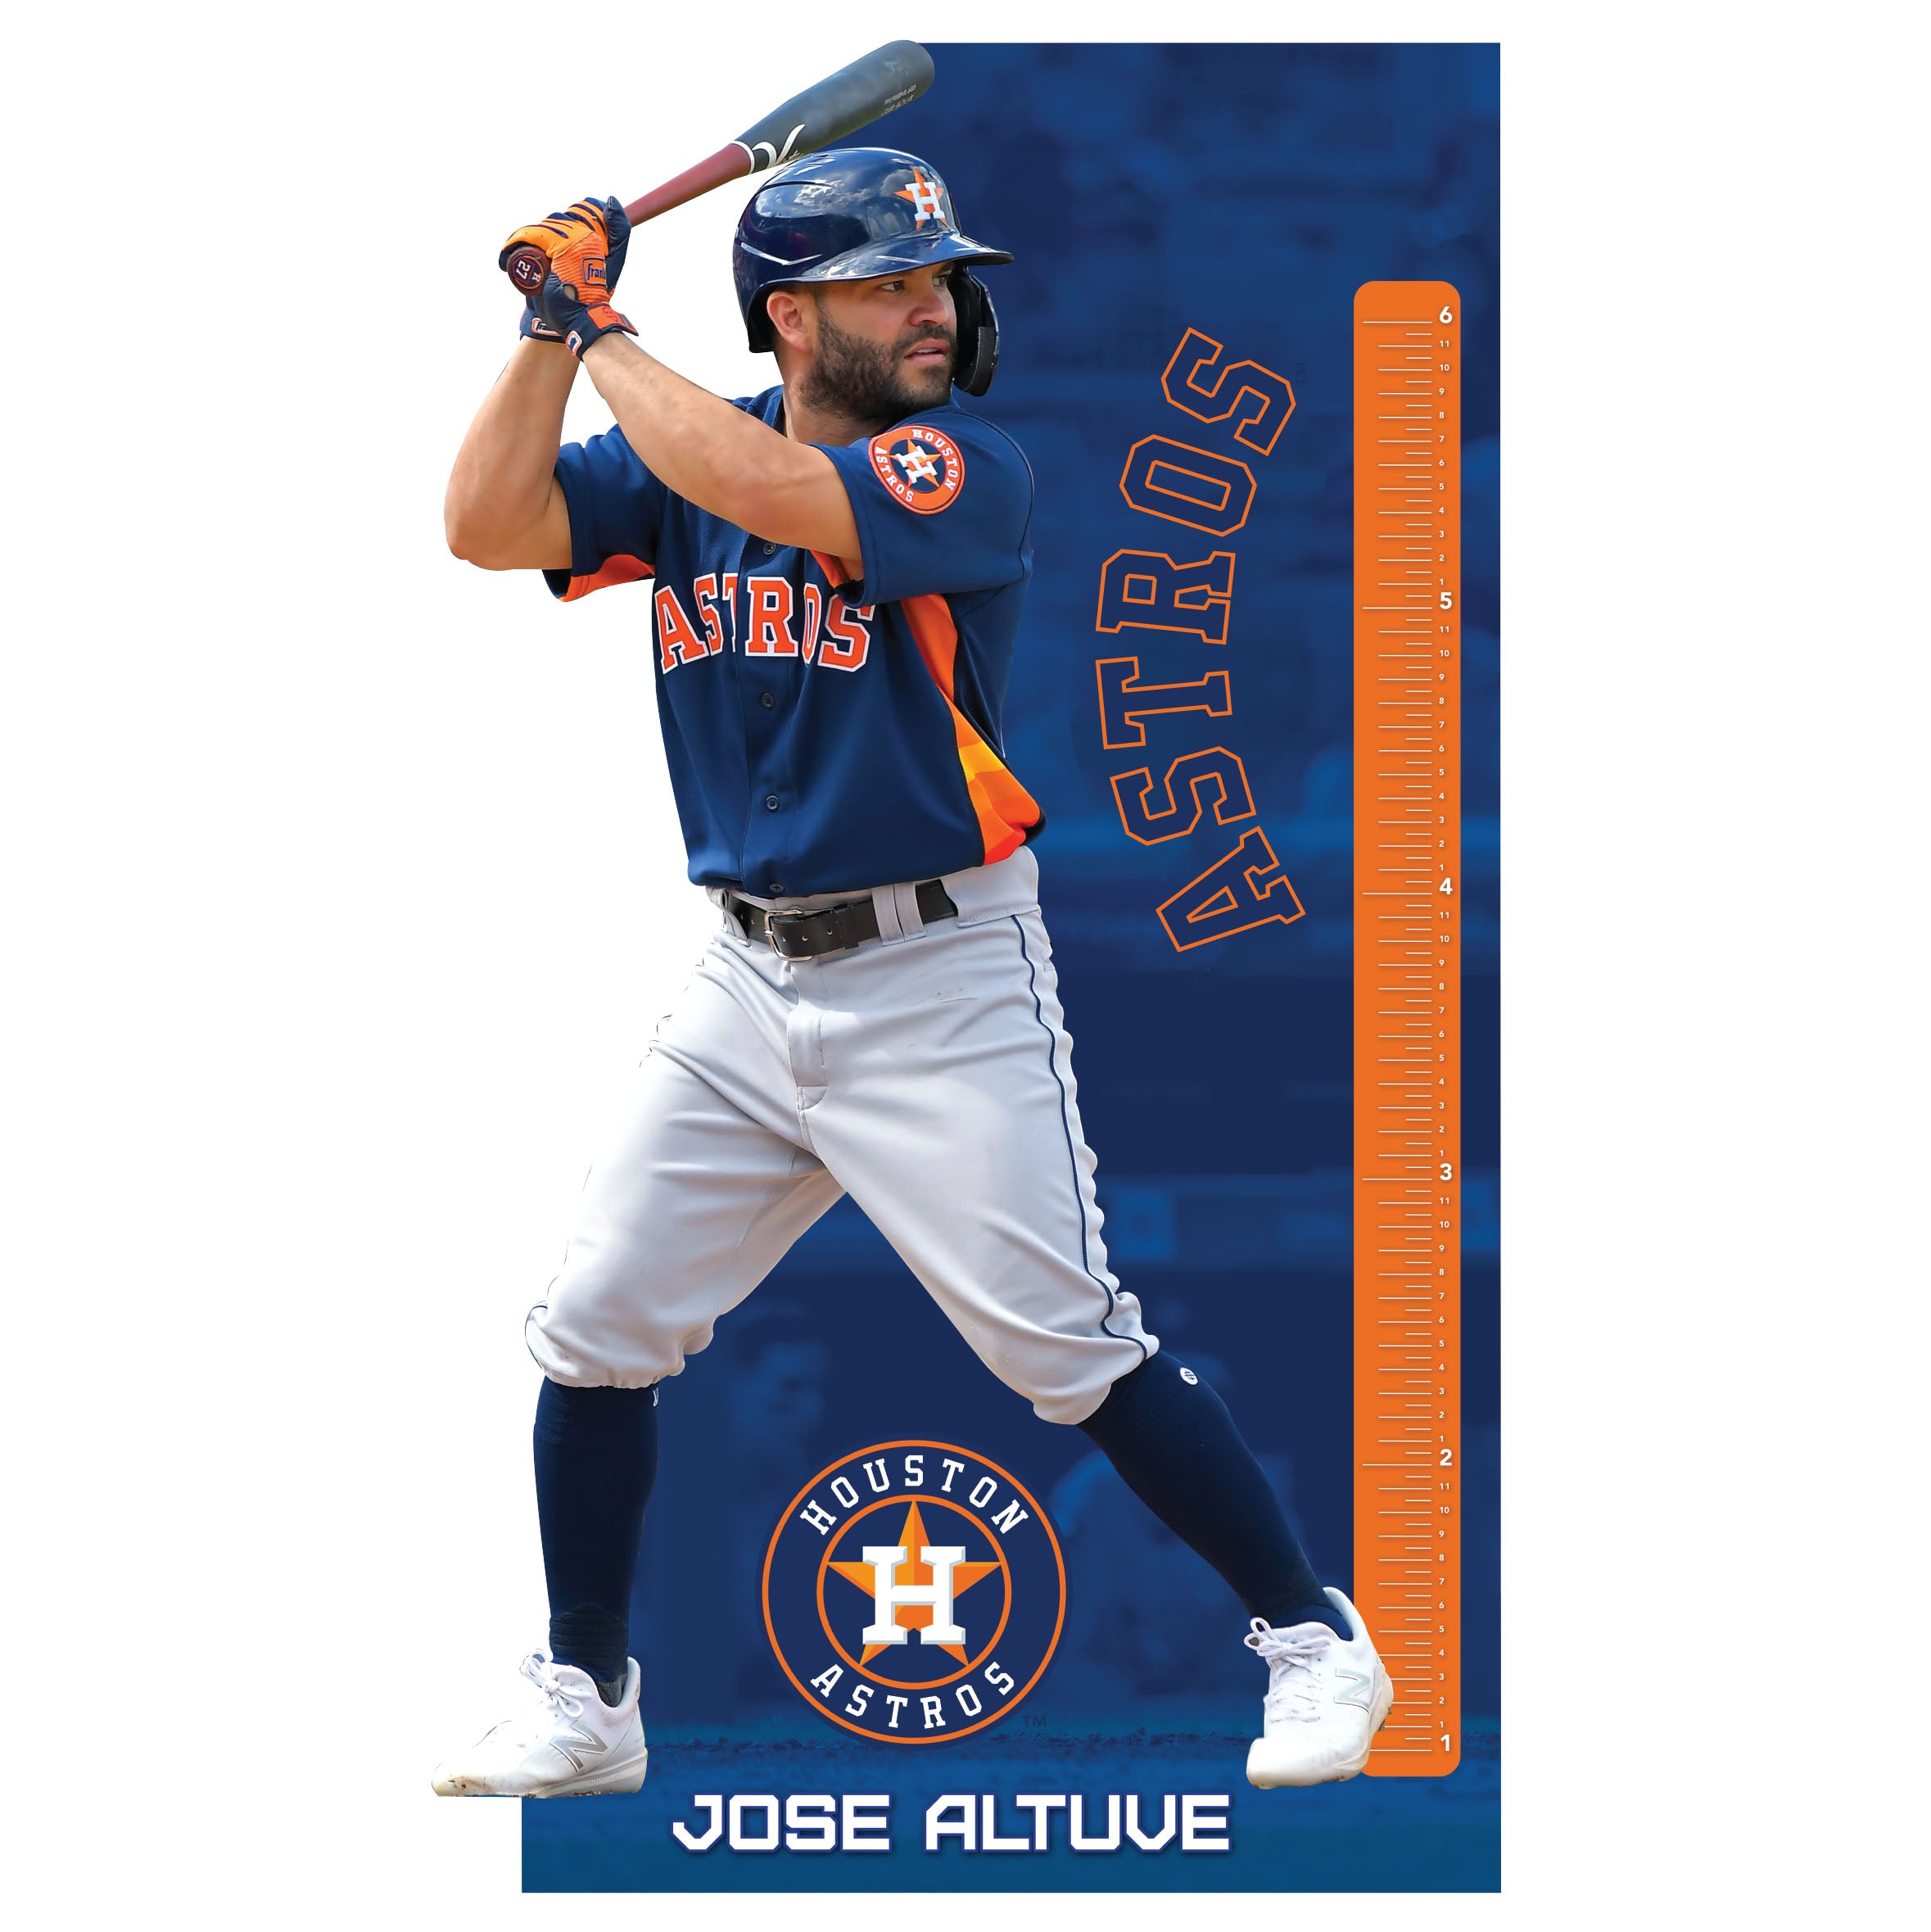 Houston Astros: Jose Altuve 2021 Growth Chart - Officially Licensed ML